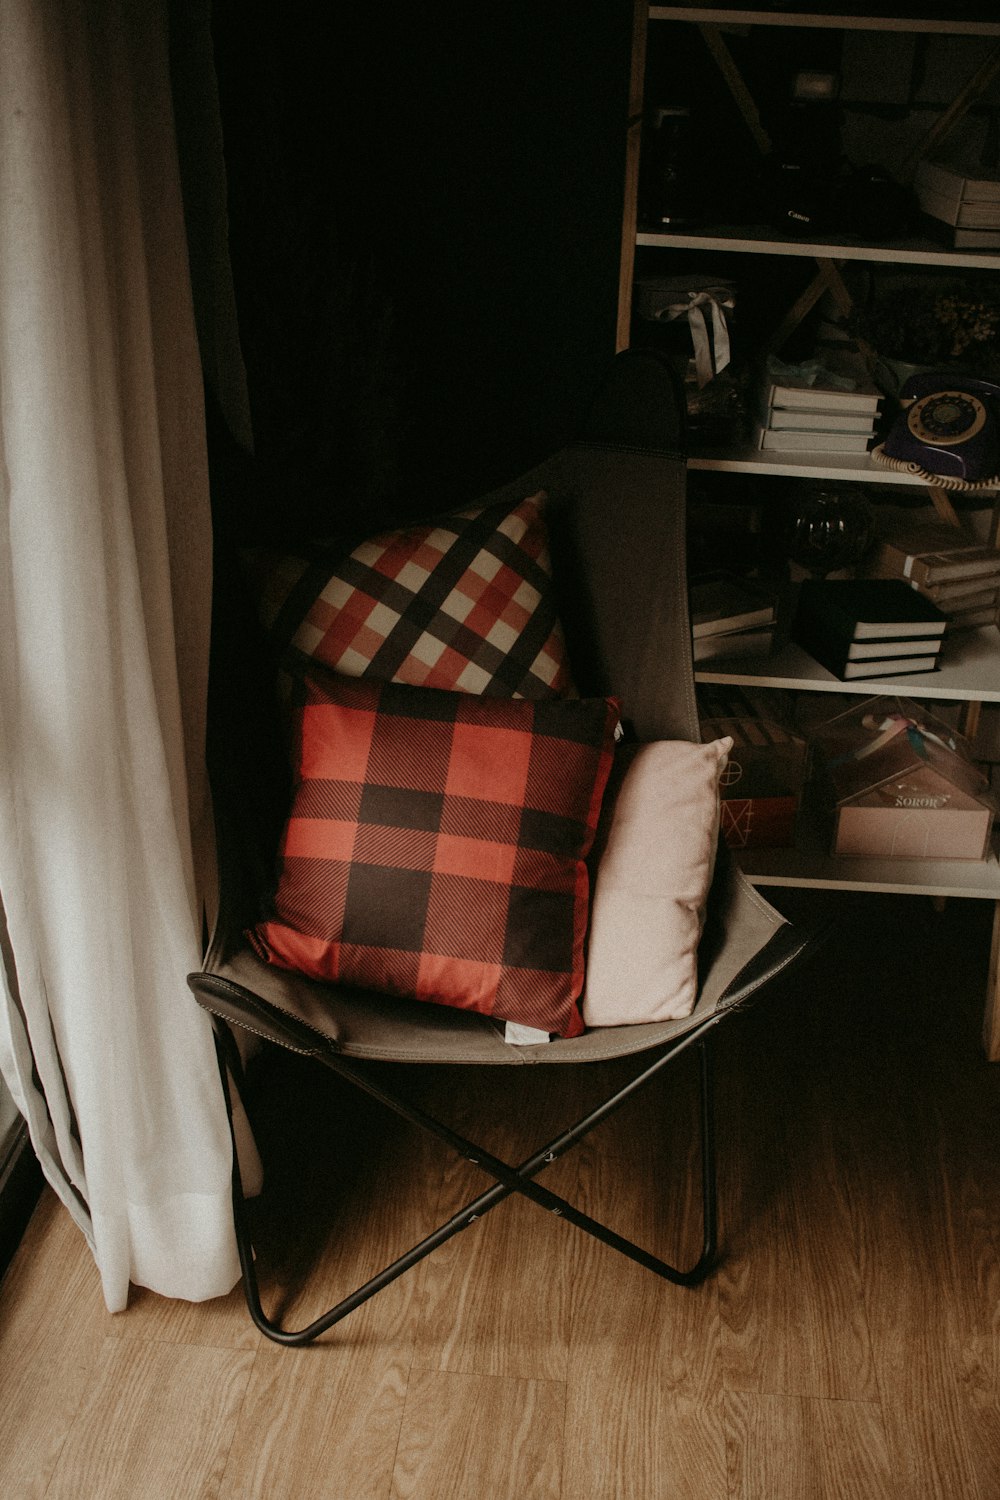 a chair with a pillow on top of it next to a book shelf